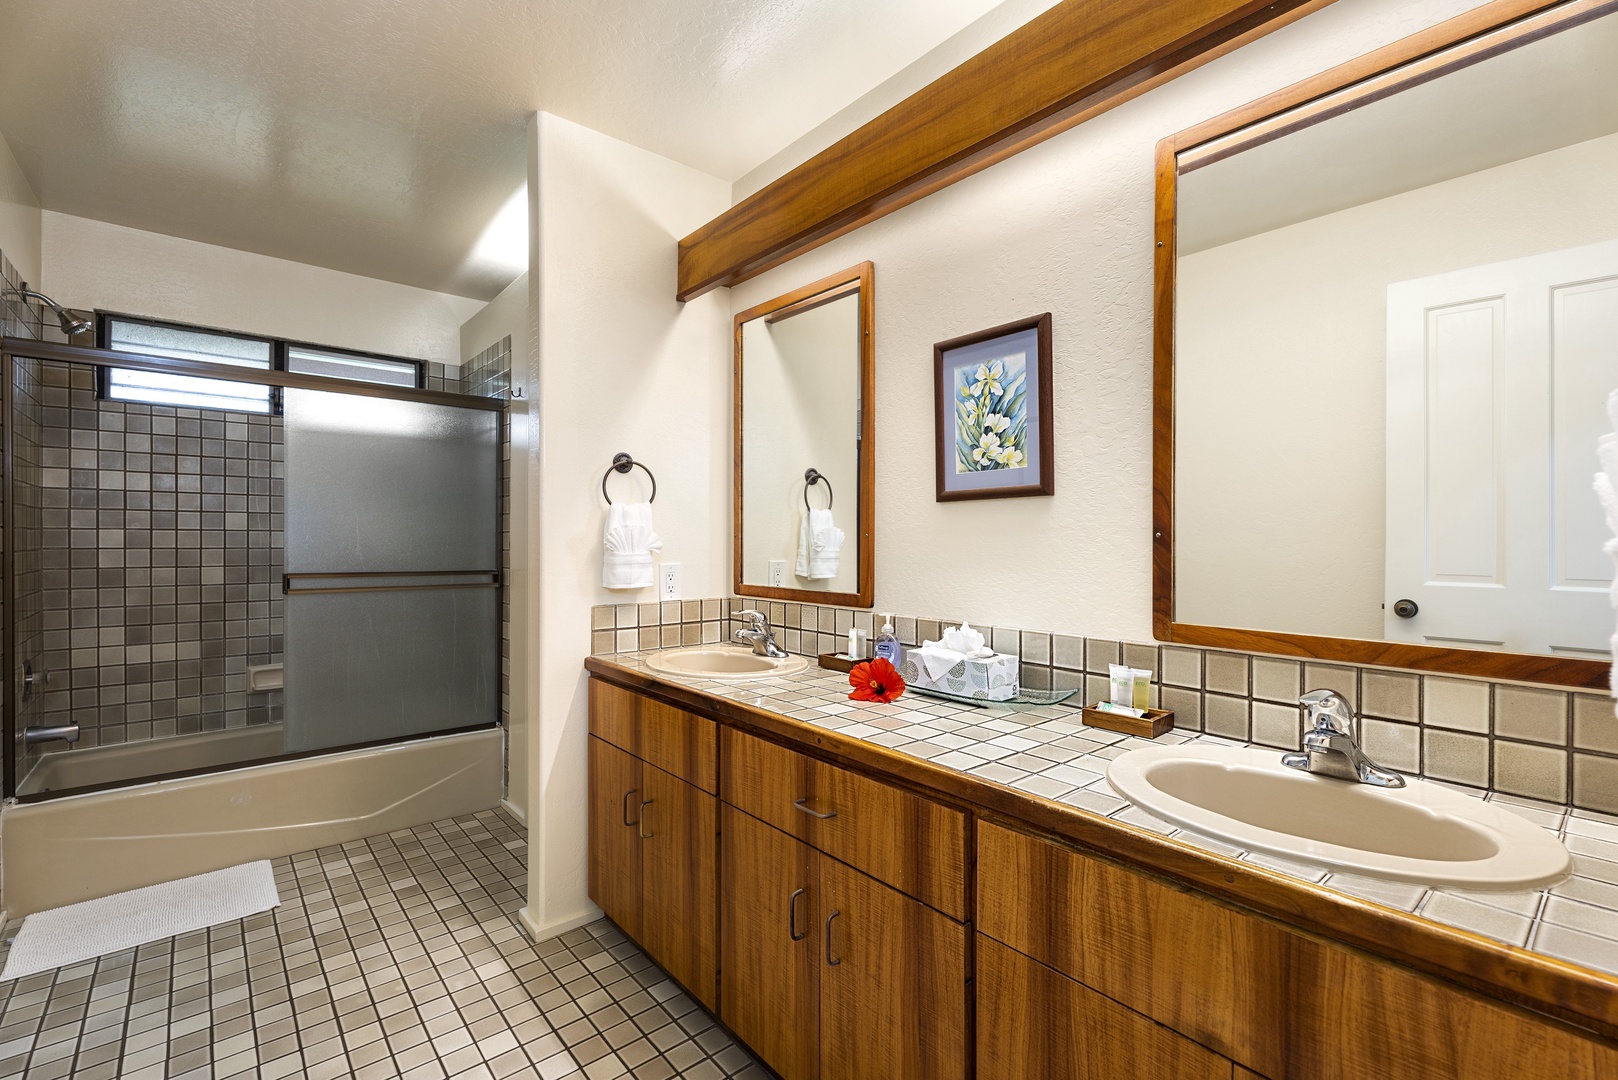 Kailua Kona Vacation Rentals, Kanaloa at Kona 1606 - Guest bathroom with dual vanities, steps from the guest bedroom